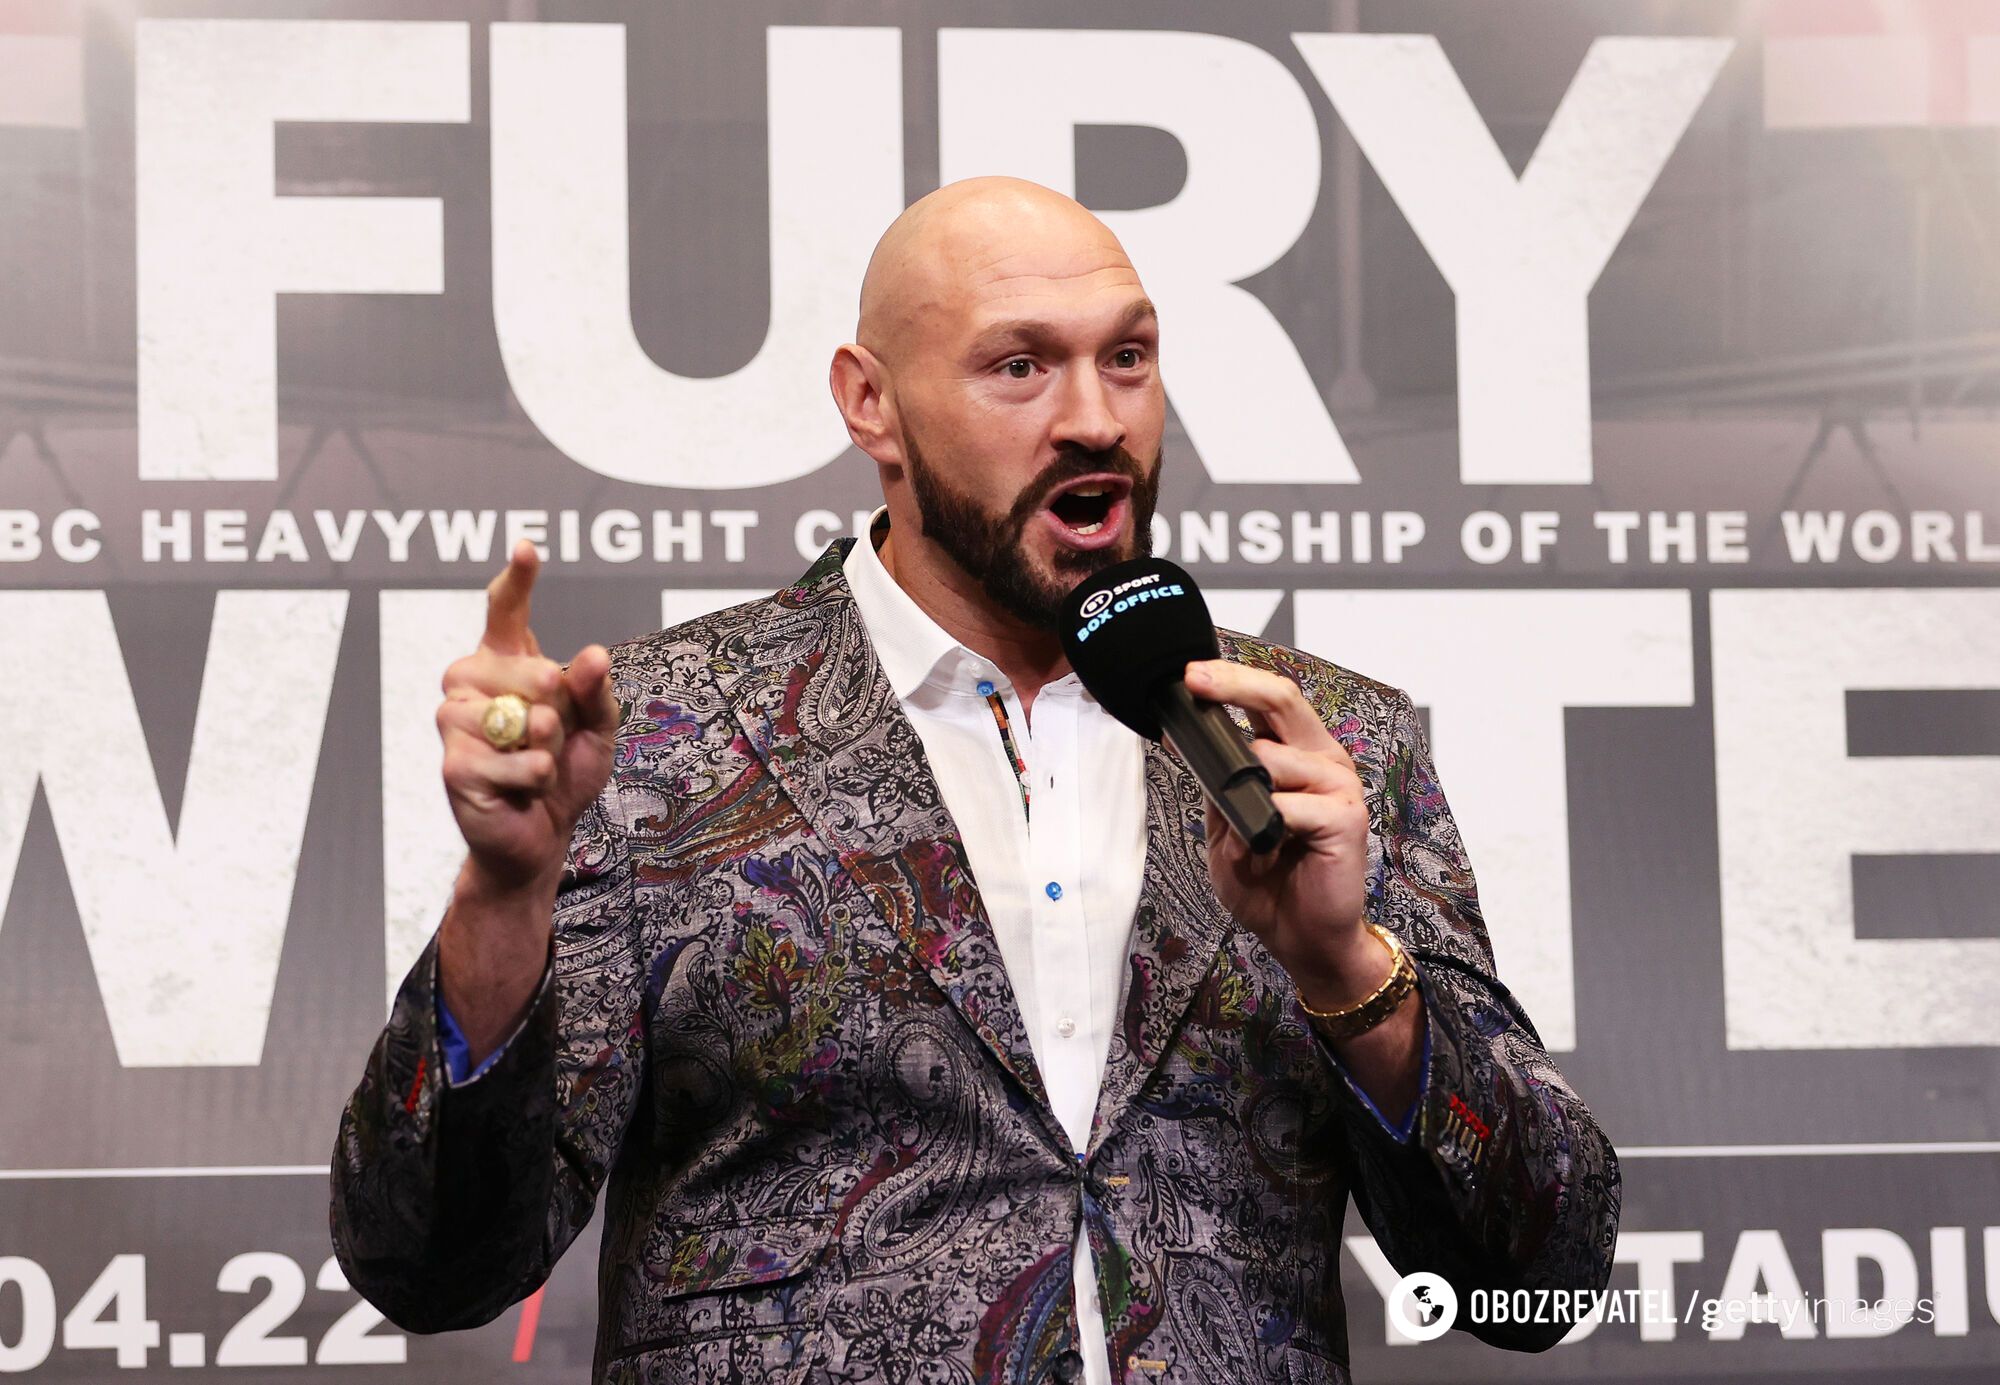 ''We should be honest'': Joshua's promoter on Fury and Usyk